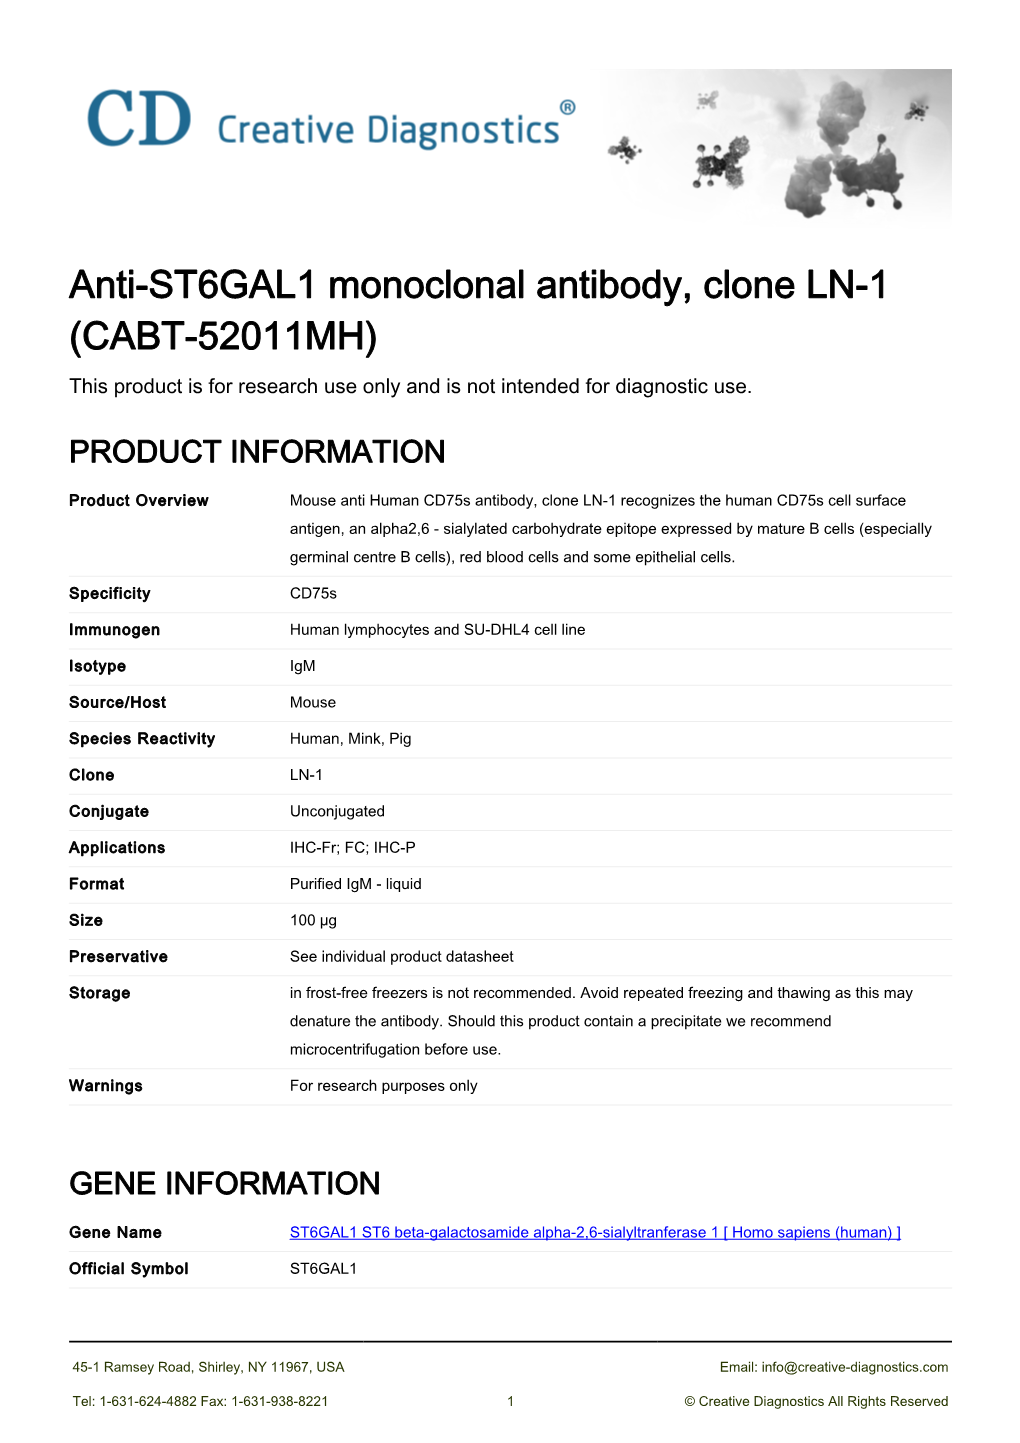 Anti-ST6GAL1 Monoclonal Antibody, Clone LN-1 (CABT-52011MH) This Product Is for Research Use Only and Is Not Intended for Diagnostic Use